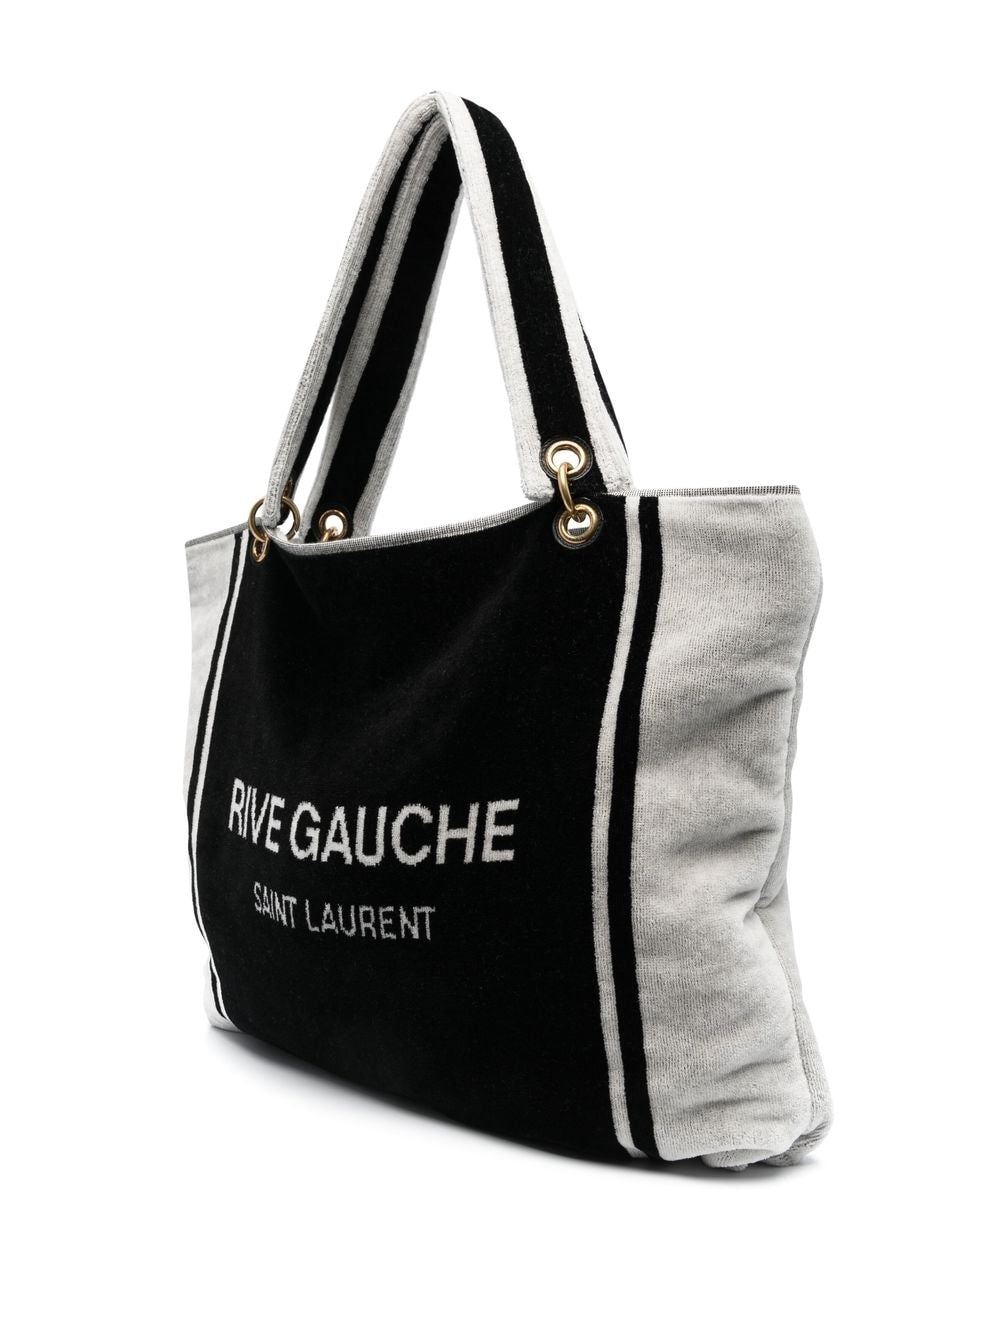 Tote Handbag with Gold-Tone Accents and Detachable Handle - BLACK AND WHITE